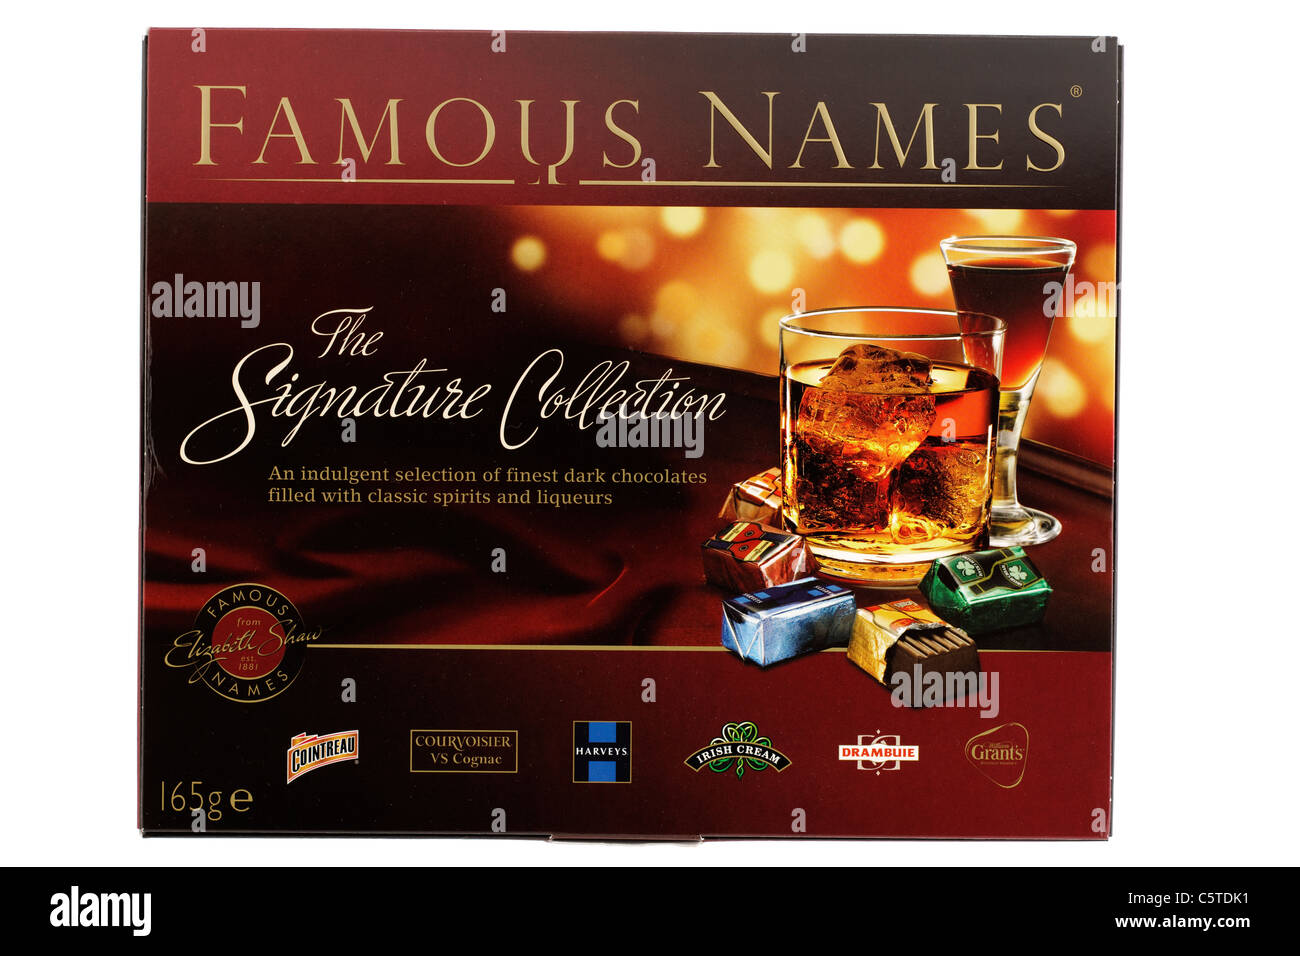 Box of Famous Names The Signature Collection dark chocolates filled with classic spirits and liqueurs. Stock Photo